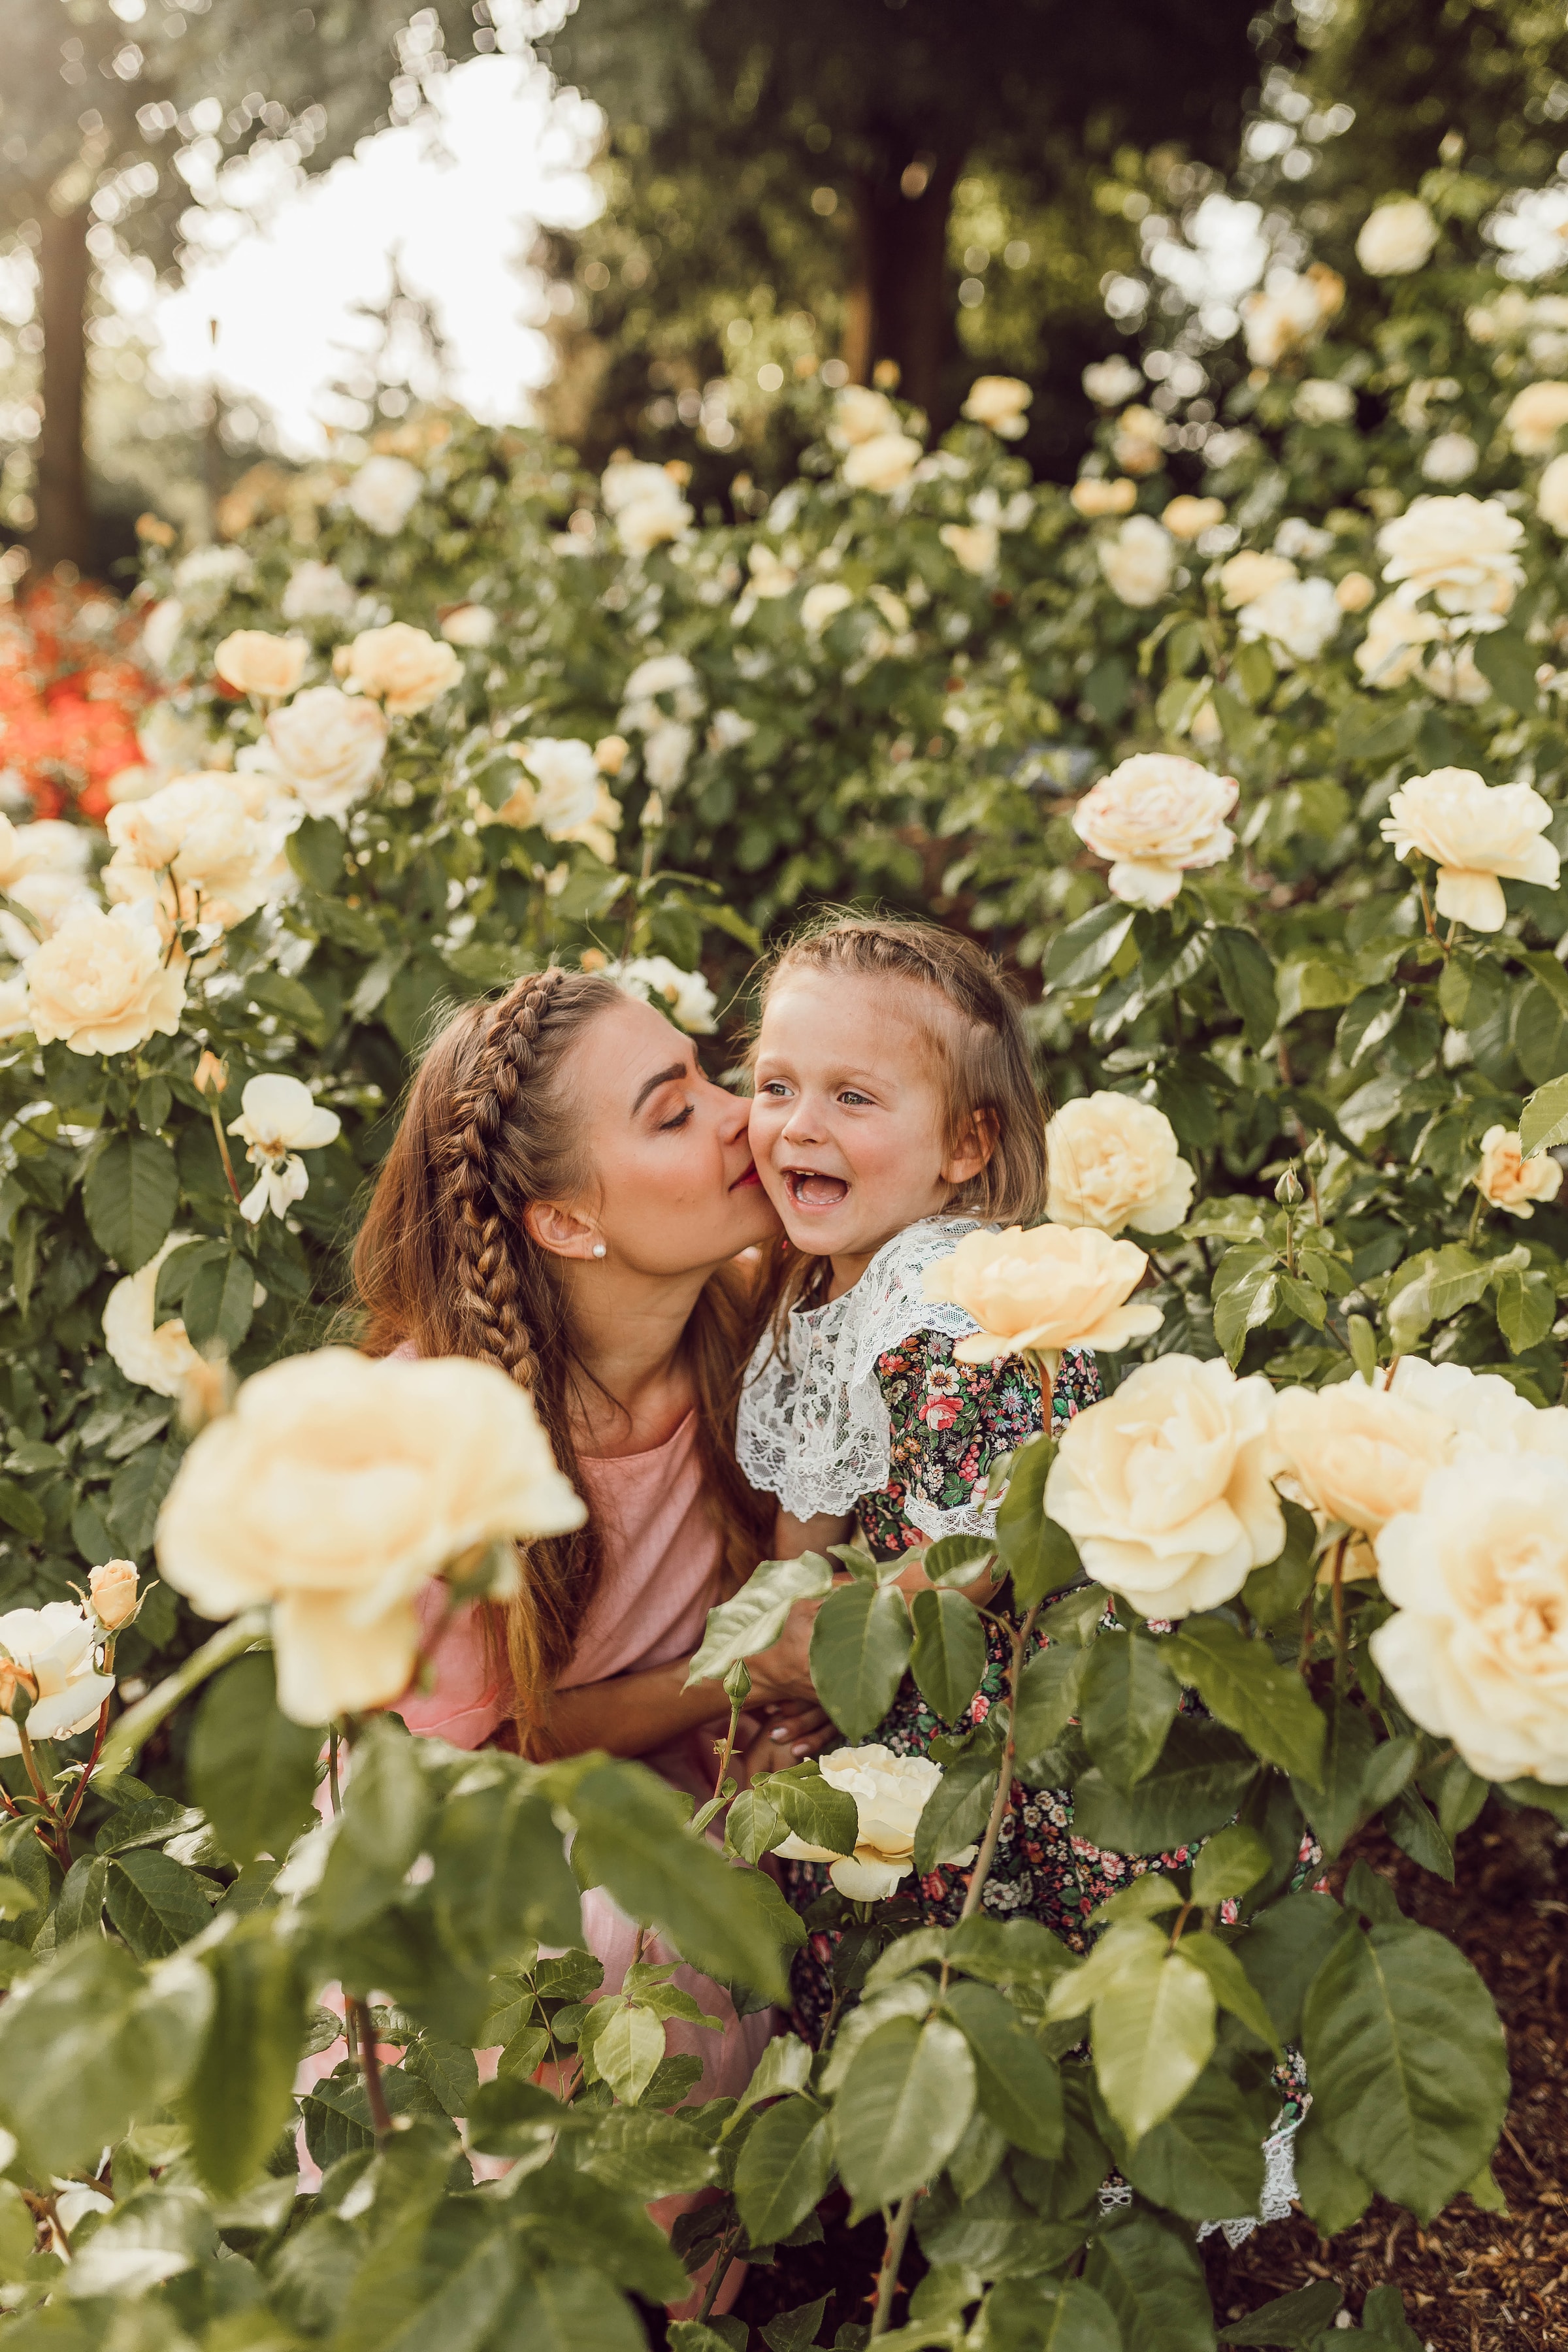 A mother kissing her little girl in a garden | Source: Pexels